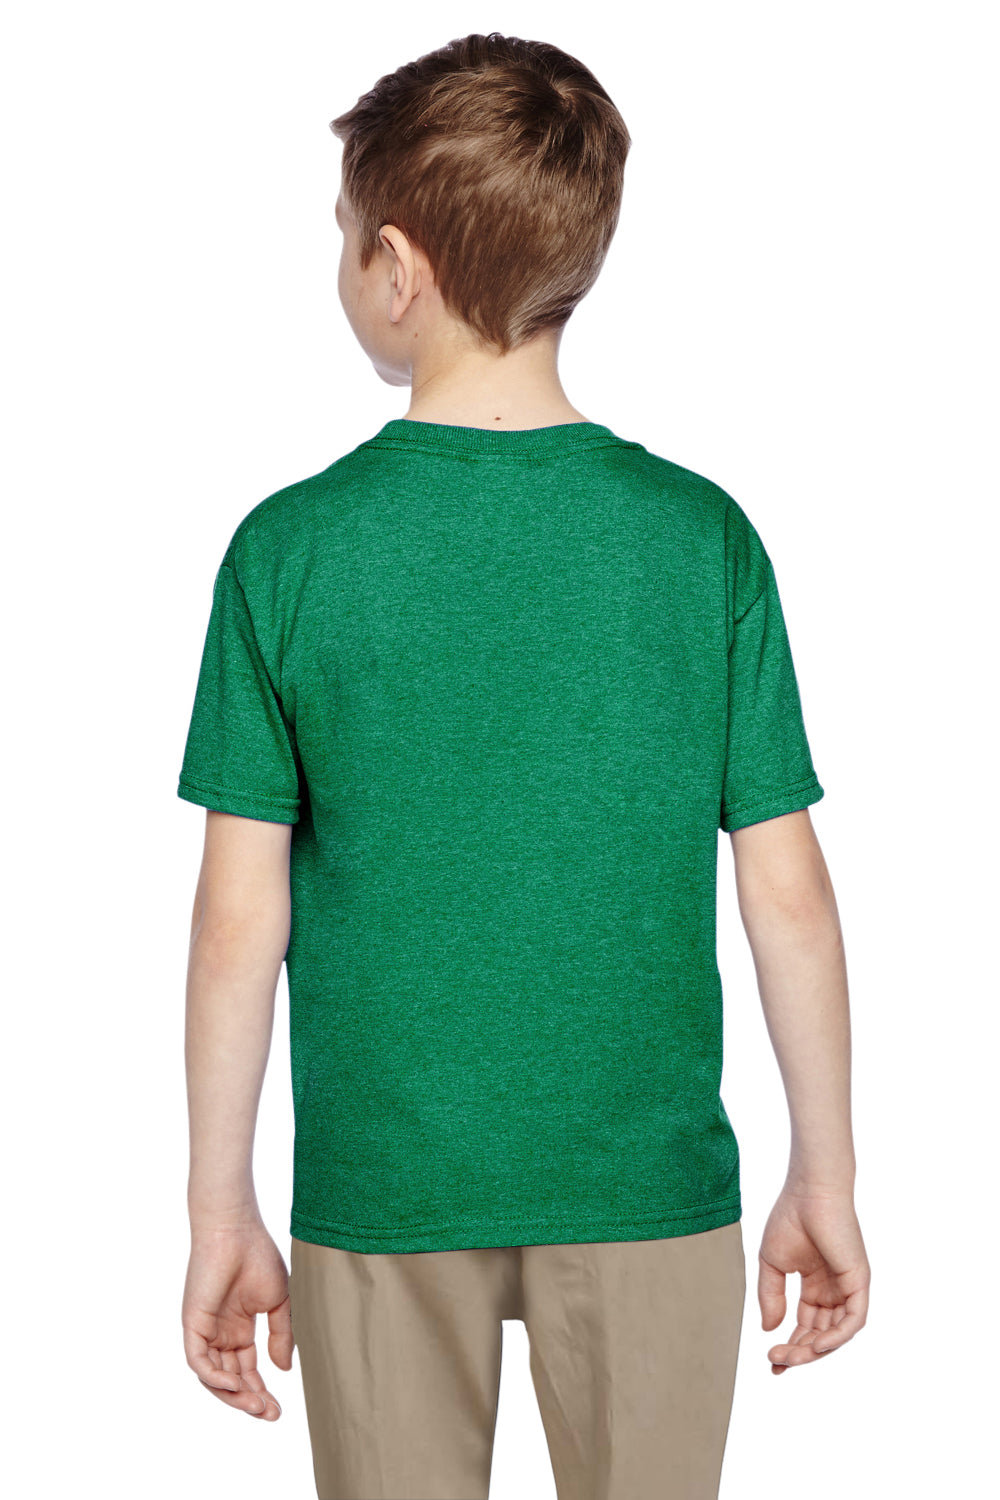 Fruit Of The Loom 3931B Youth HD Jersey Short Sleeve Crewneck T-Shirt Heather Green Back